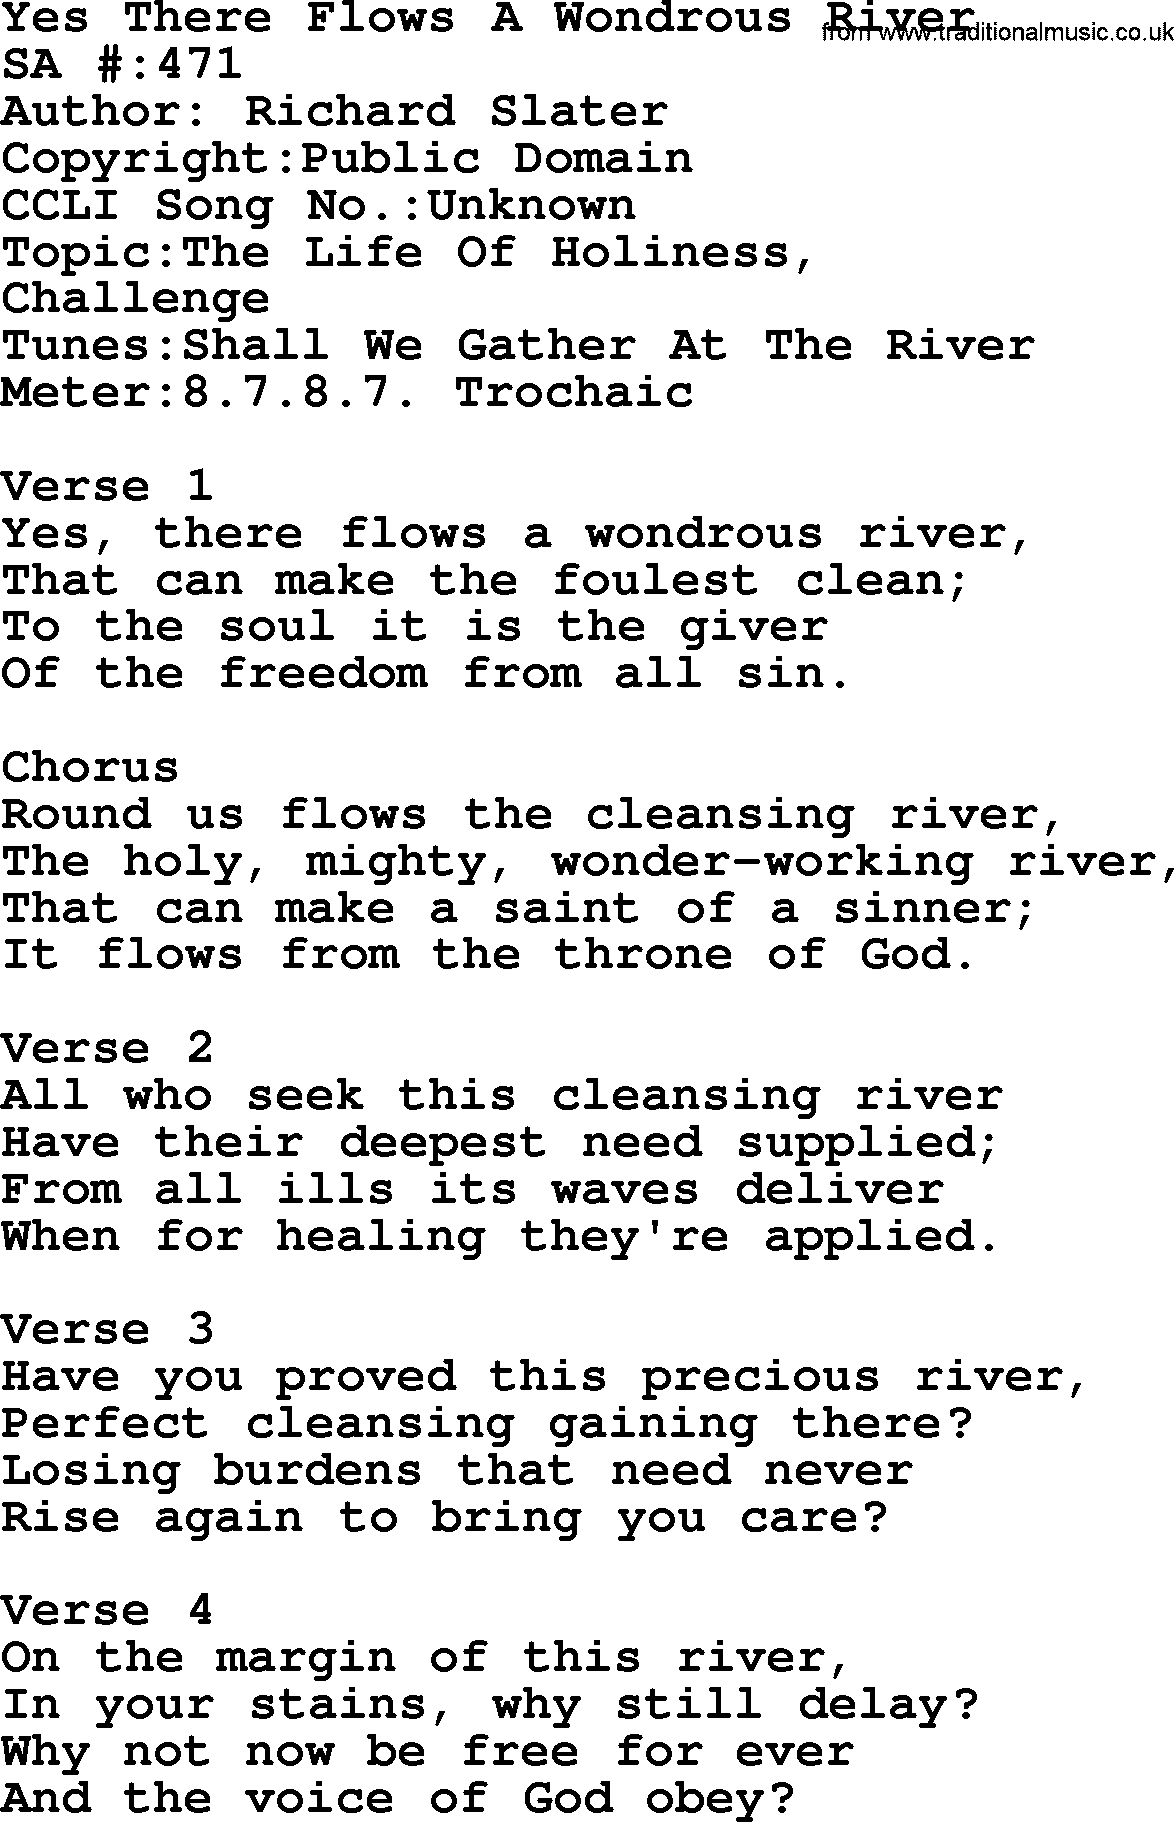 Salvation Army Hymnal, title: Yes There Flows A Wondrous River, with lyrics and PDF,